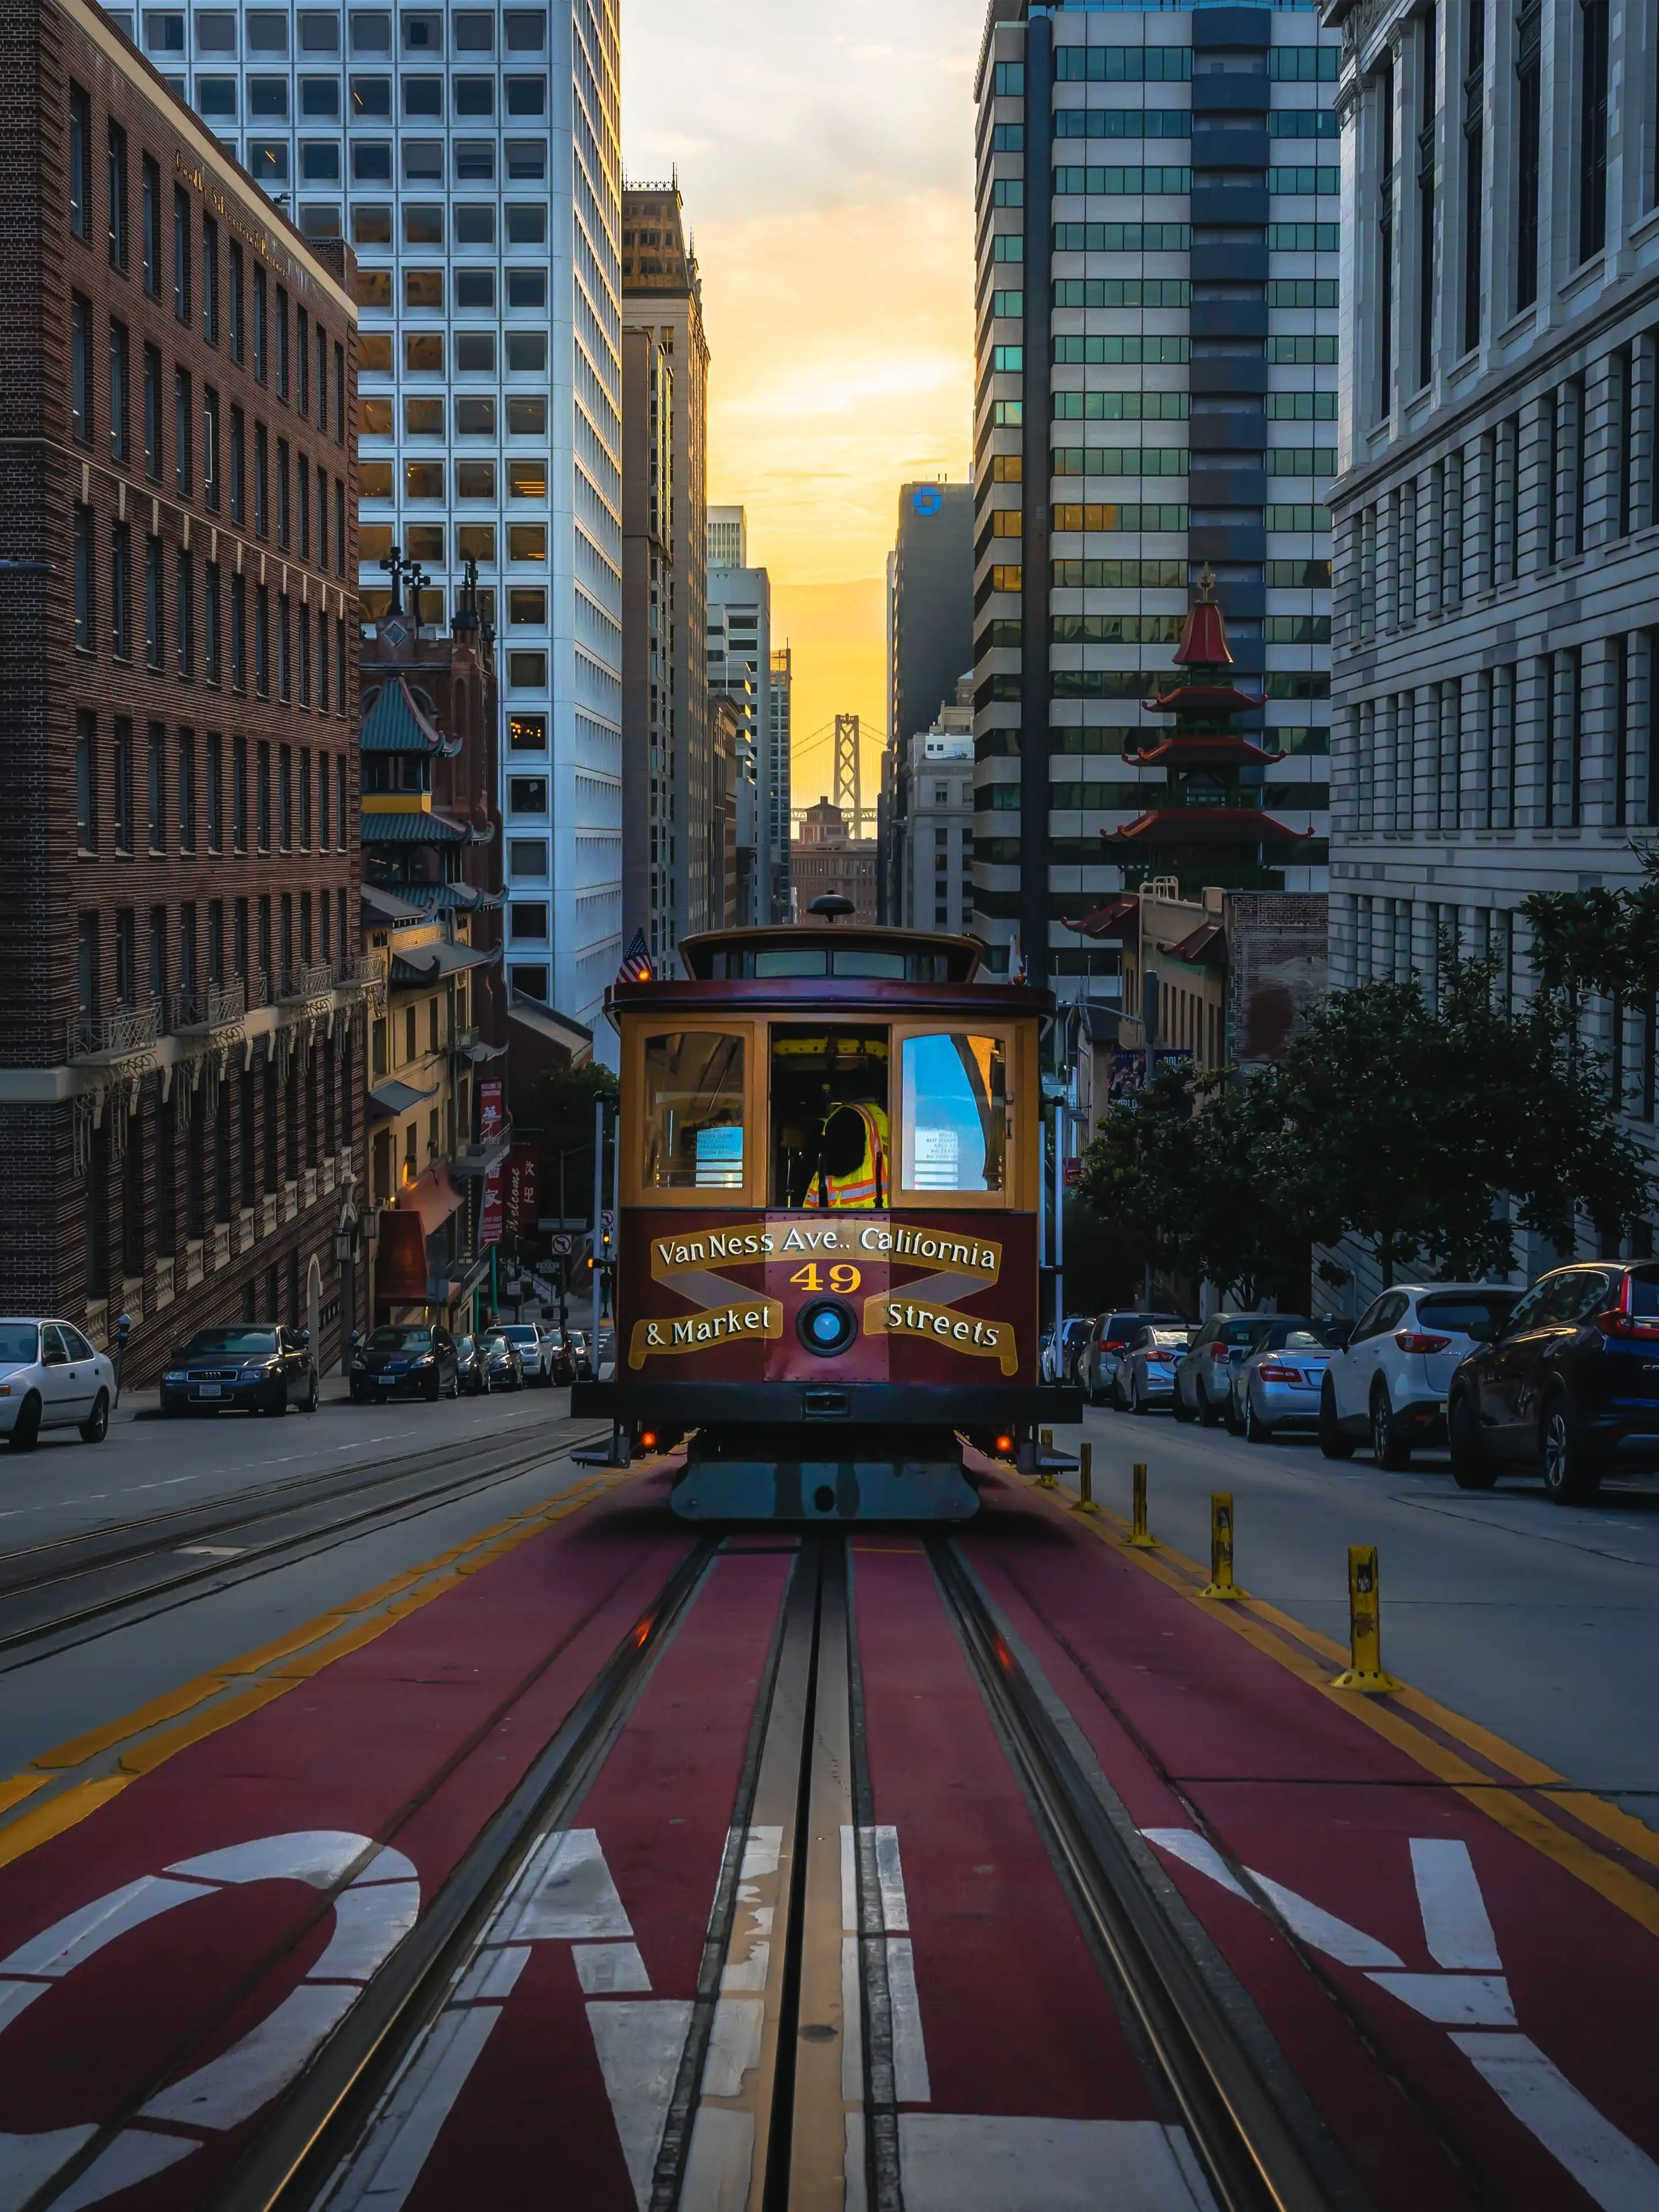 57+ San Francisco Wallpapers: HD, 4K, 5K for PC and Mobile | Download free  images for iPhone, Android